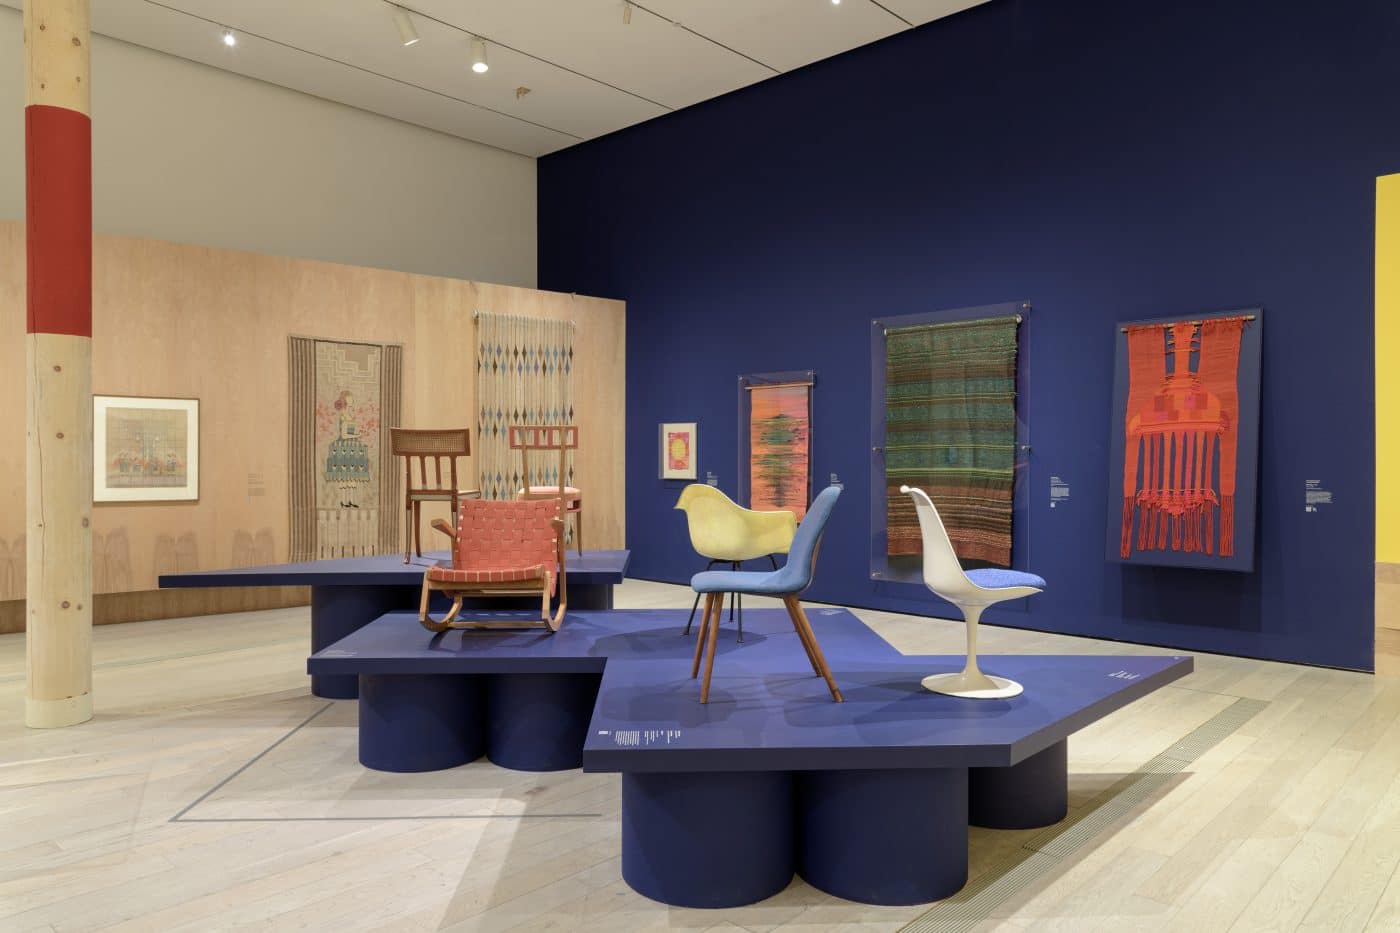 An installation view of the exhibition “Scandinavian Design and the United States: 1890–1980,” at the Los Angeles County Museum of Art (LACMA)